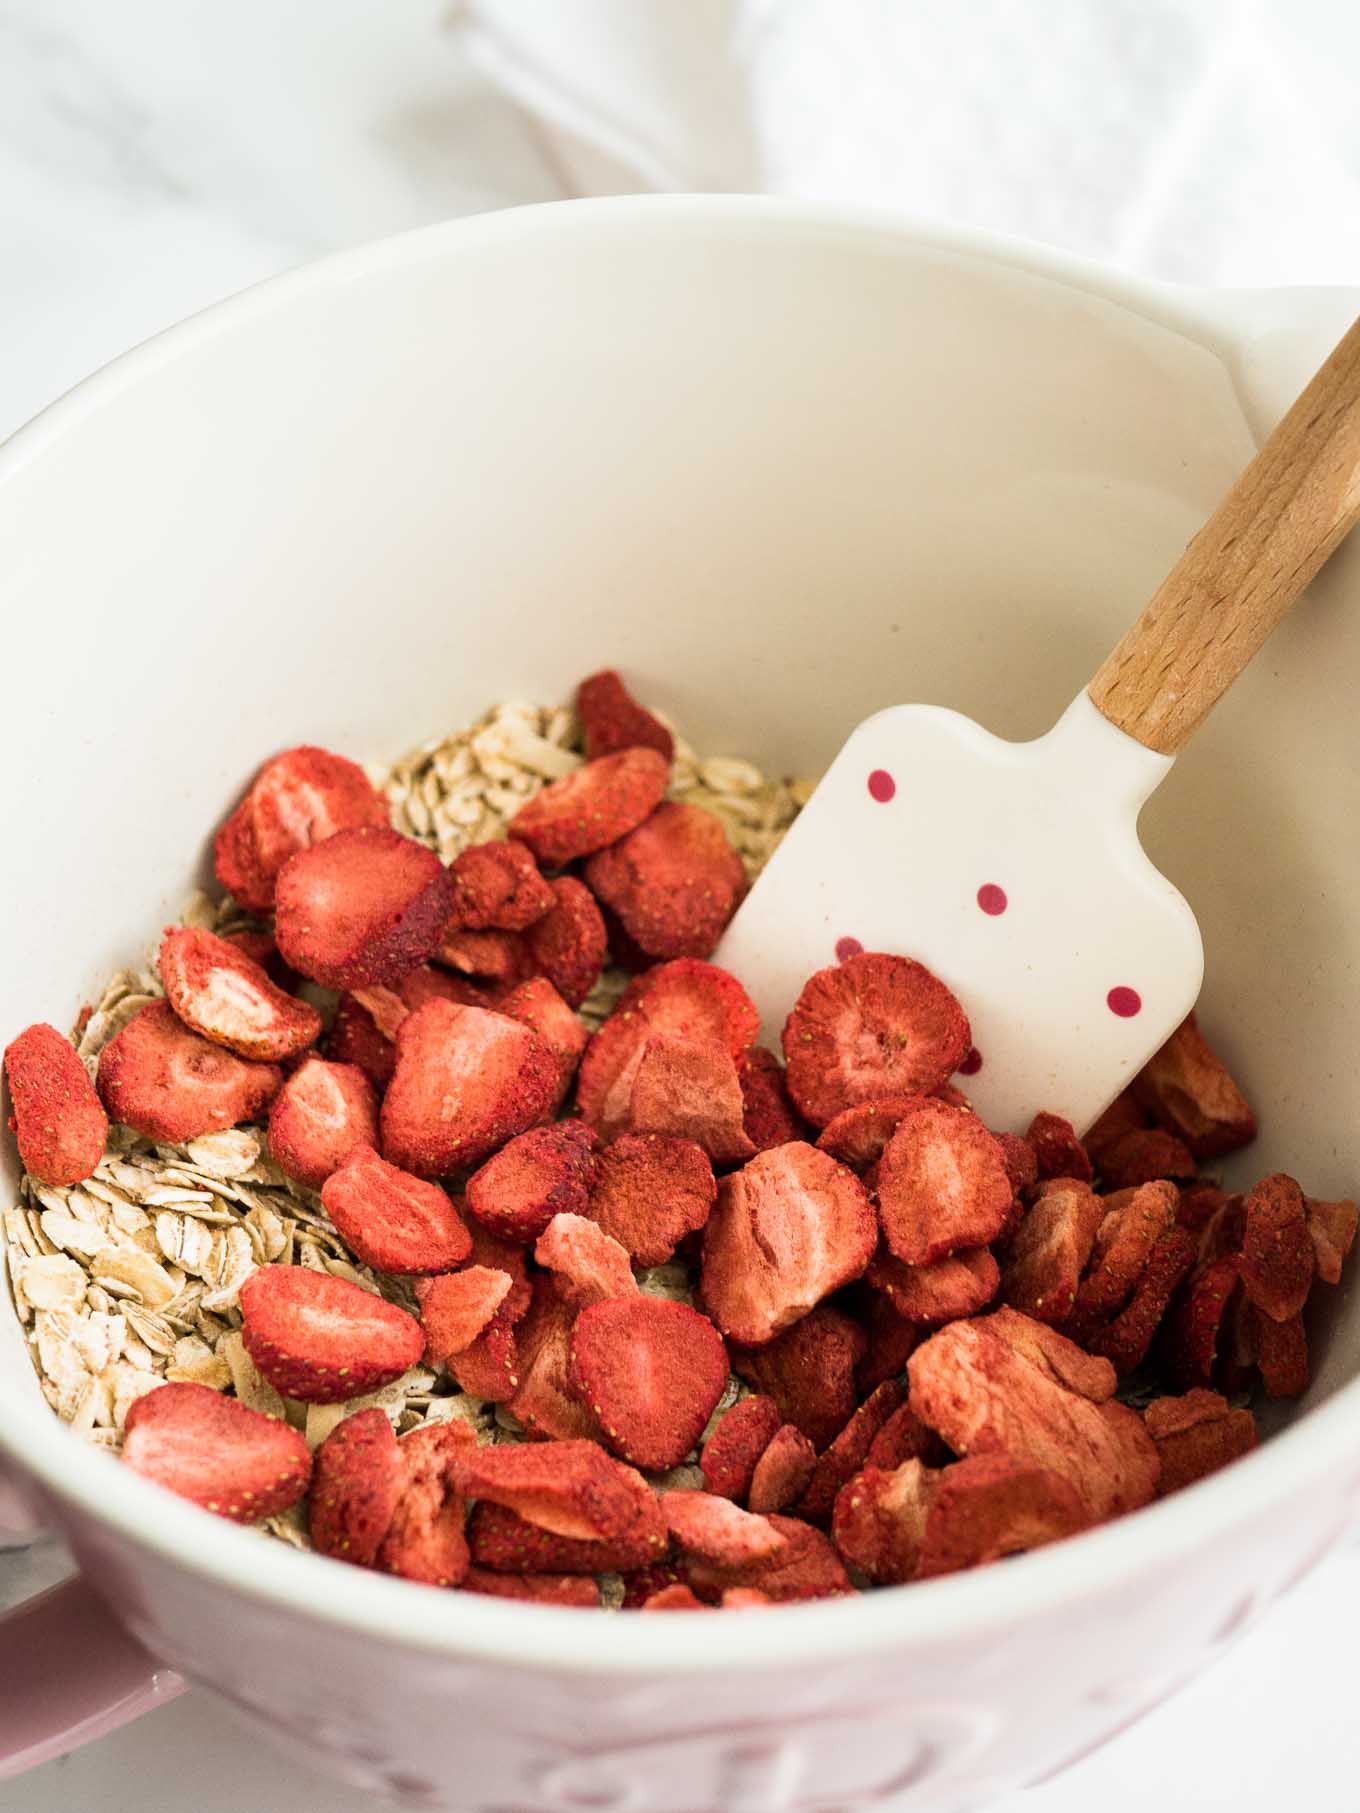 These Strawberry Baked Oatmeal Cups are perfect for busy mornings! A healthy grab-and-go breakfast or snack filled with oats, strawberries, and chia seeds.